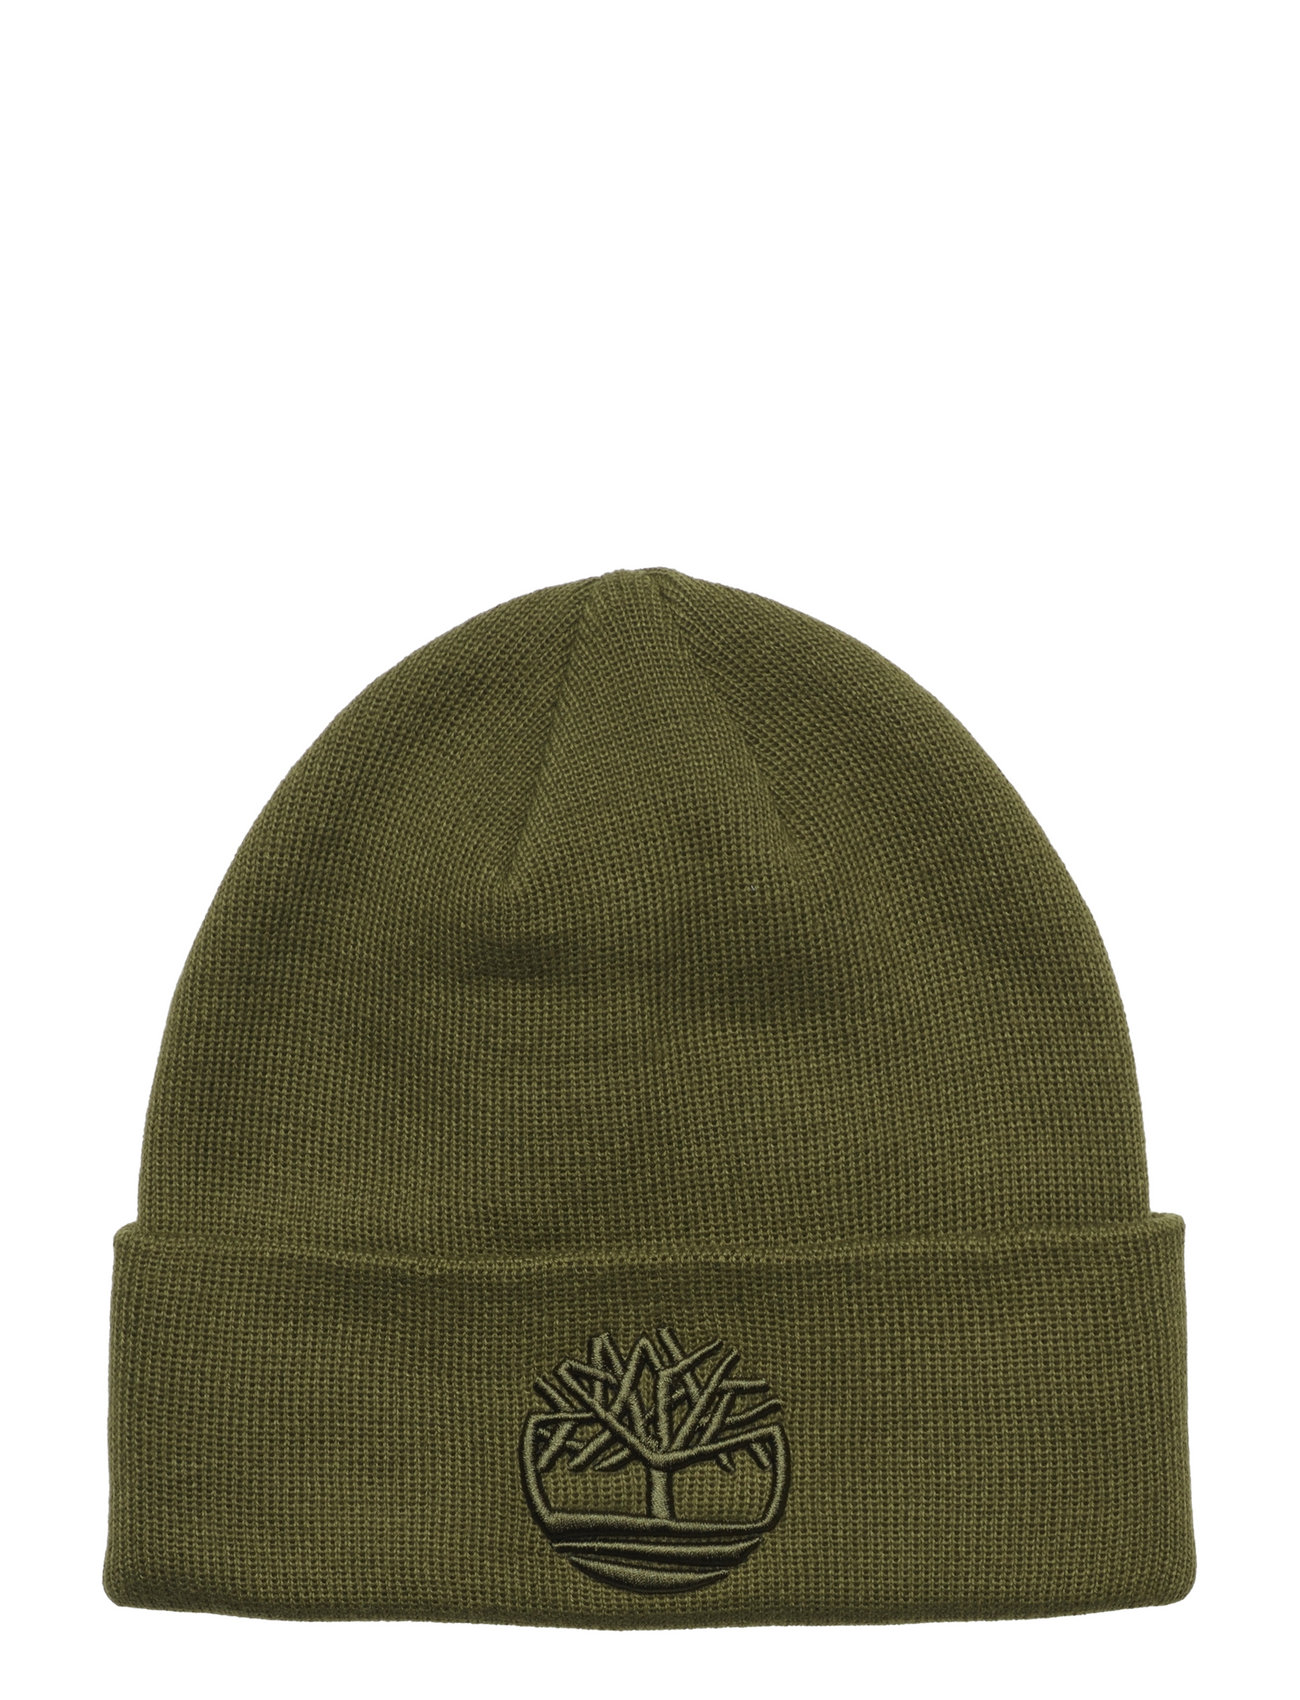 - Beanie Tonal Timberland Hats 3d Embroidery